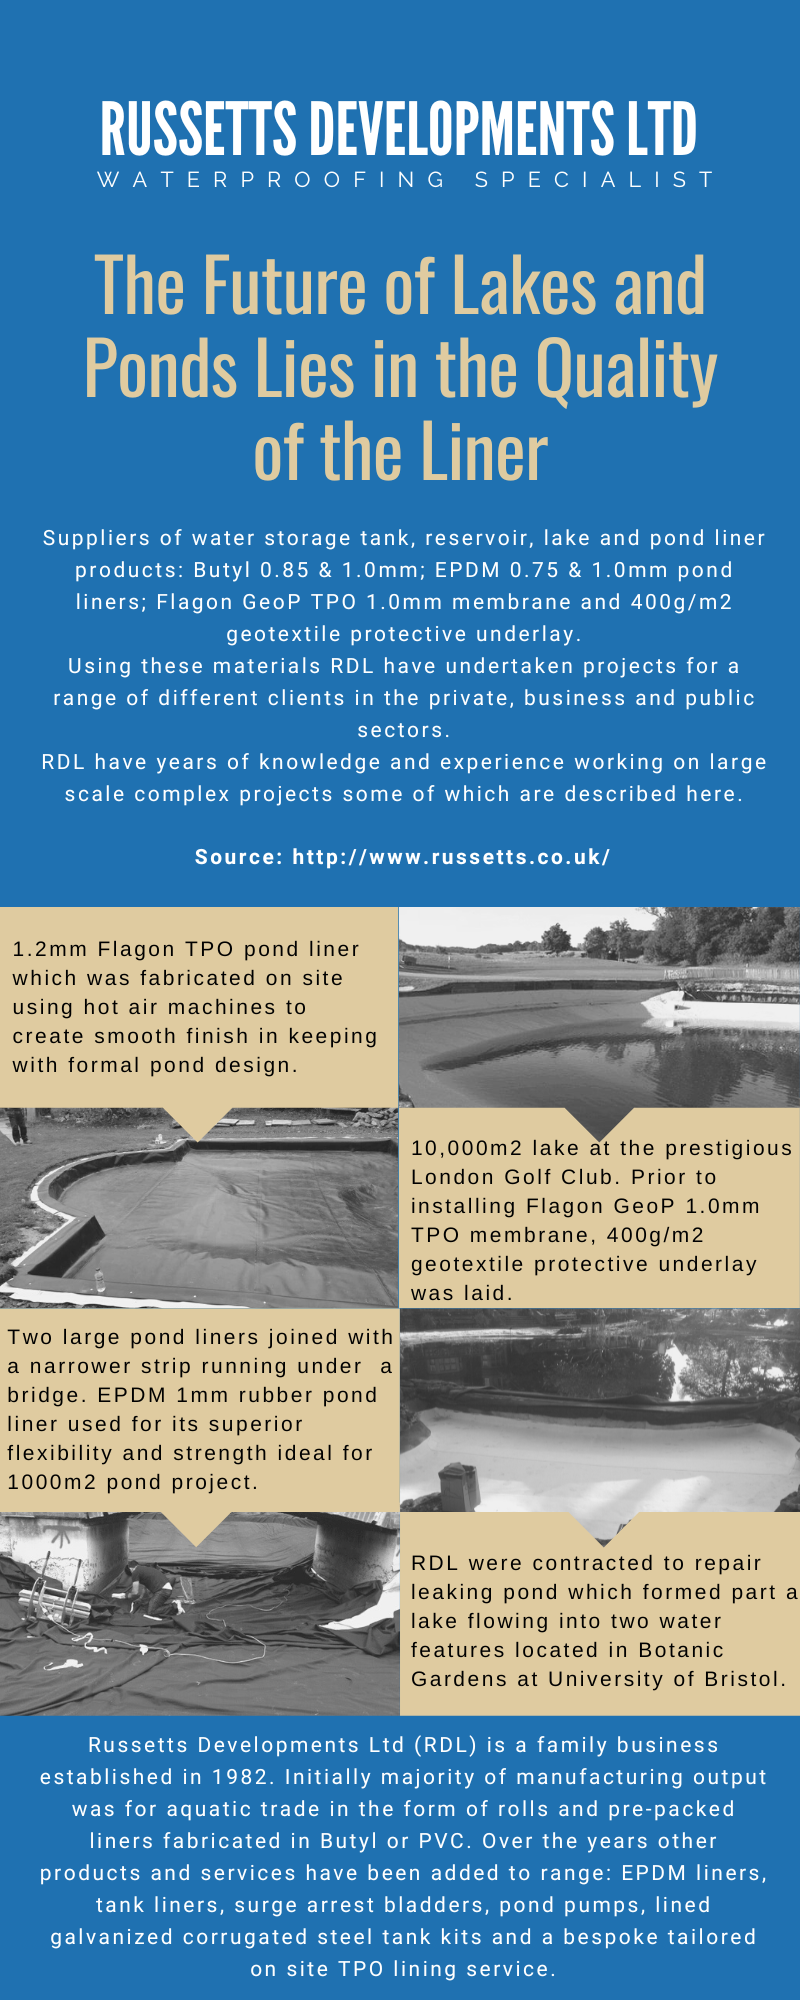 About Russetts Developments and projects in Infographic format